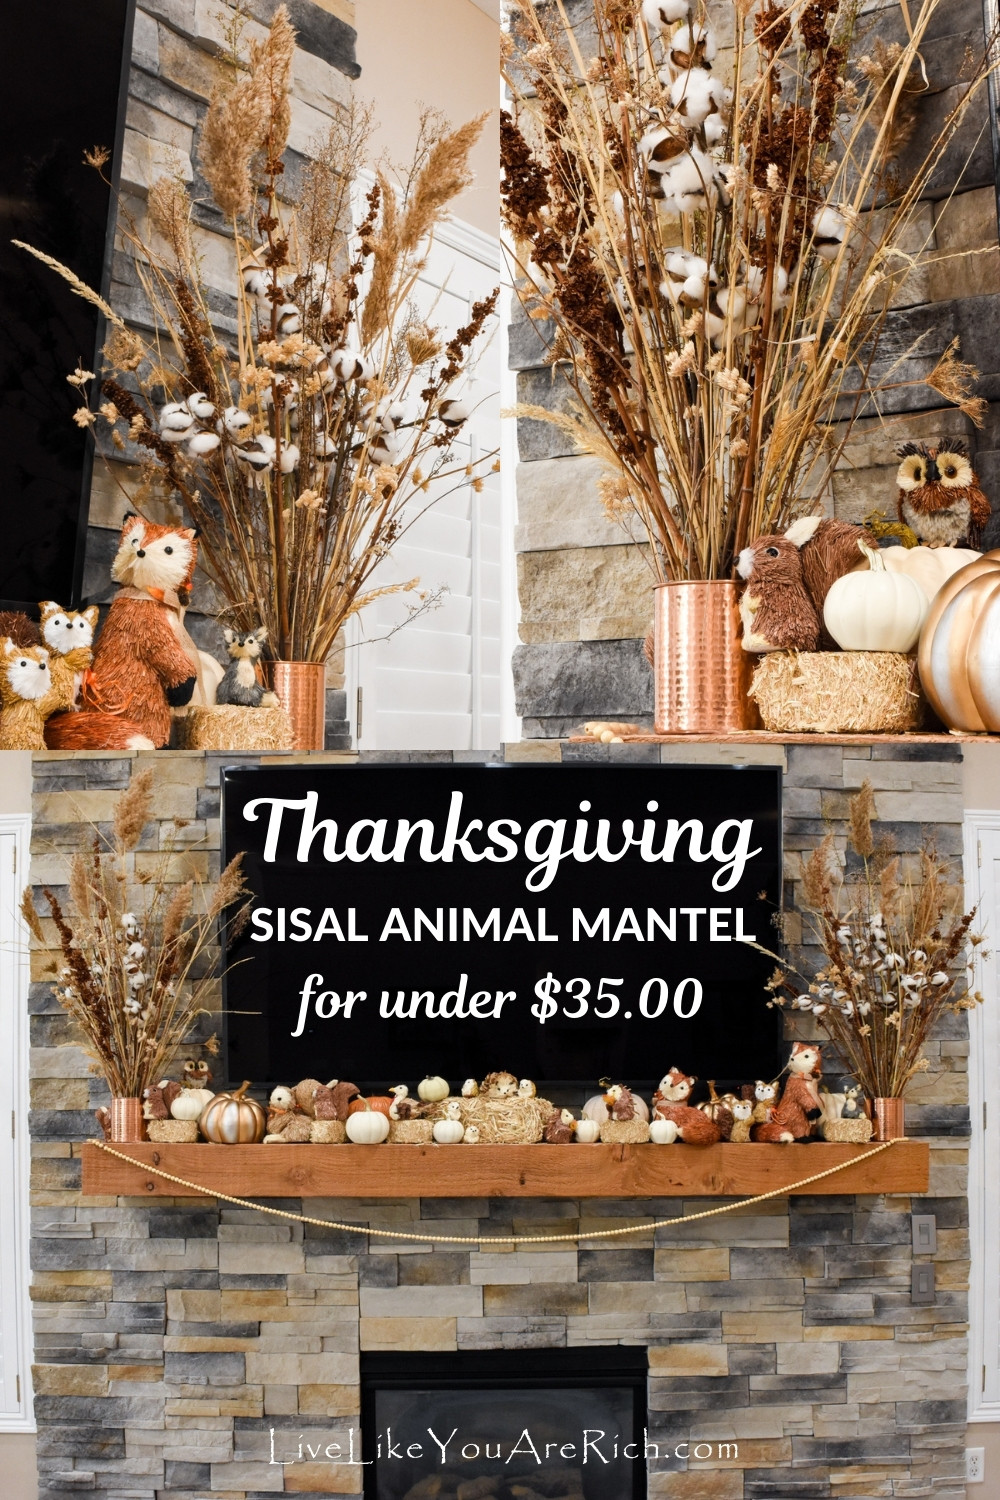 This is our Thanksgiving Sisal Animal Mantel this fall. Fall is one of my favorite times of the year. This mantel is similar to my Thanksgiving mantel last year, with some updated changes.